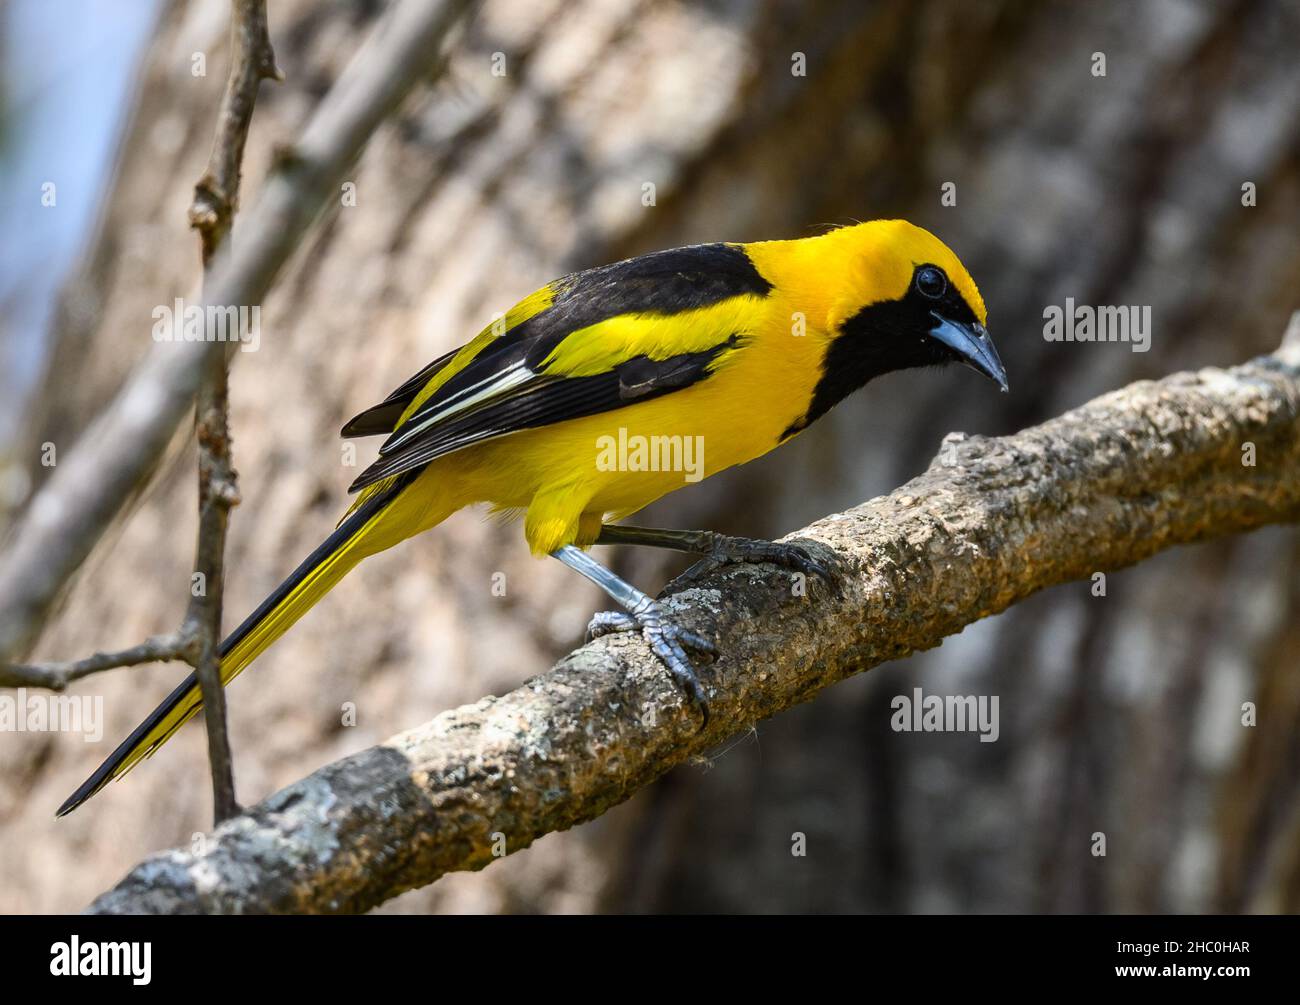 A Yellow-tailed Oriole (Icterus mesomelas) perched on a branch. Ecuador, South America. Stock Photo